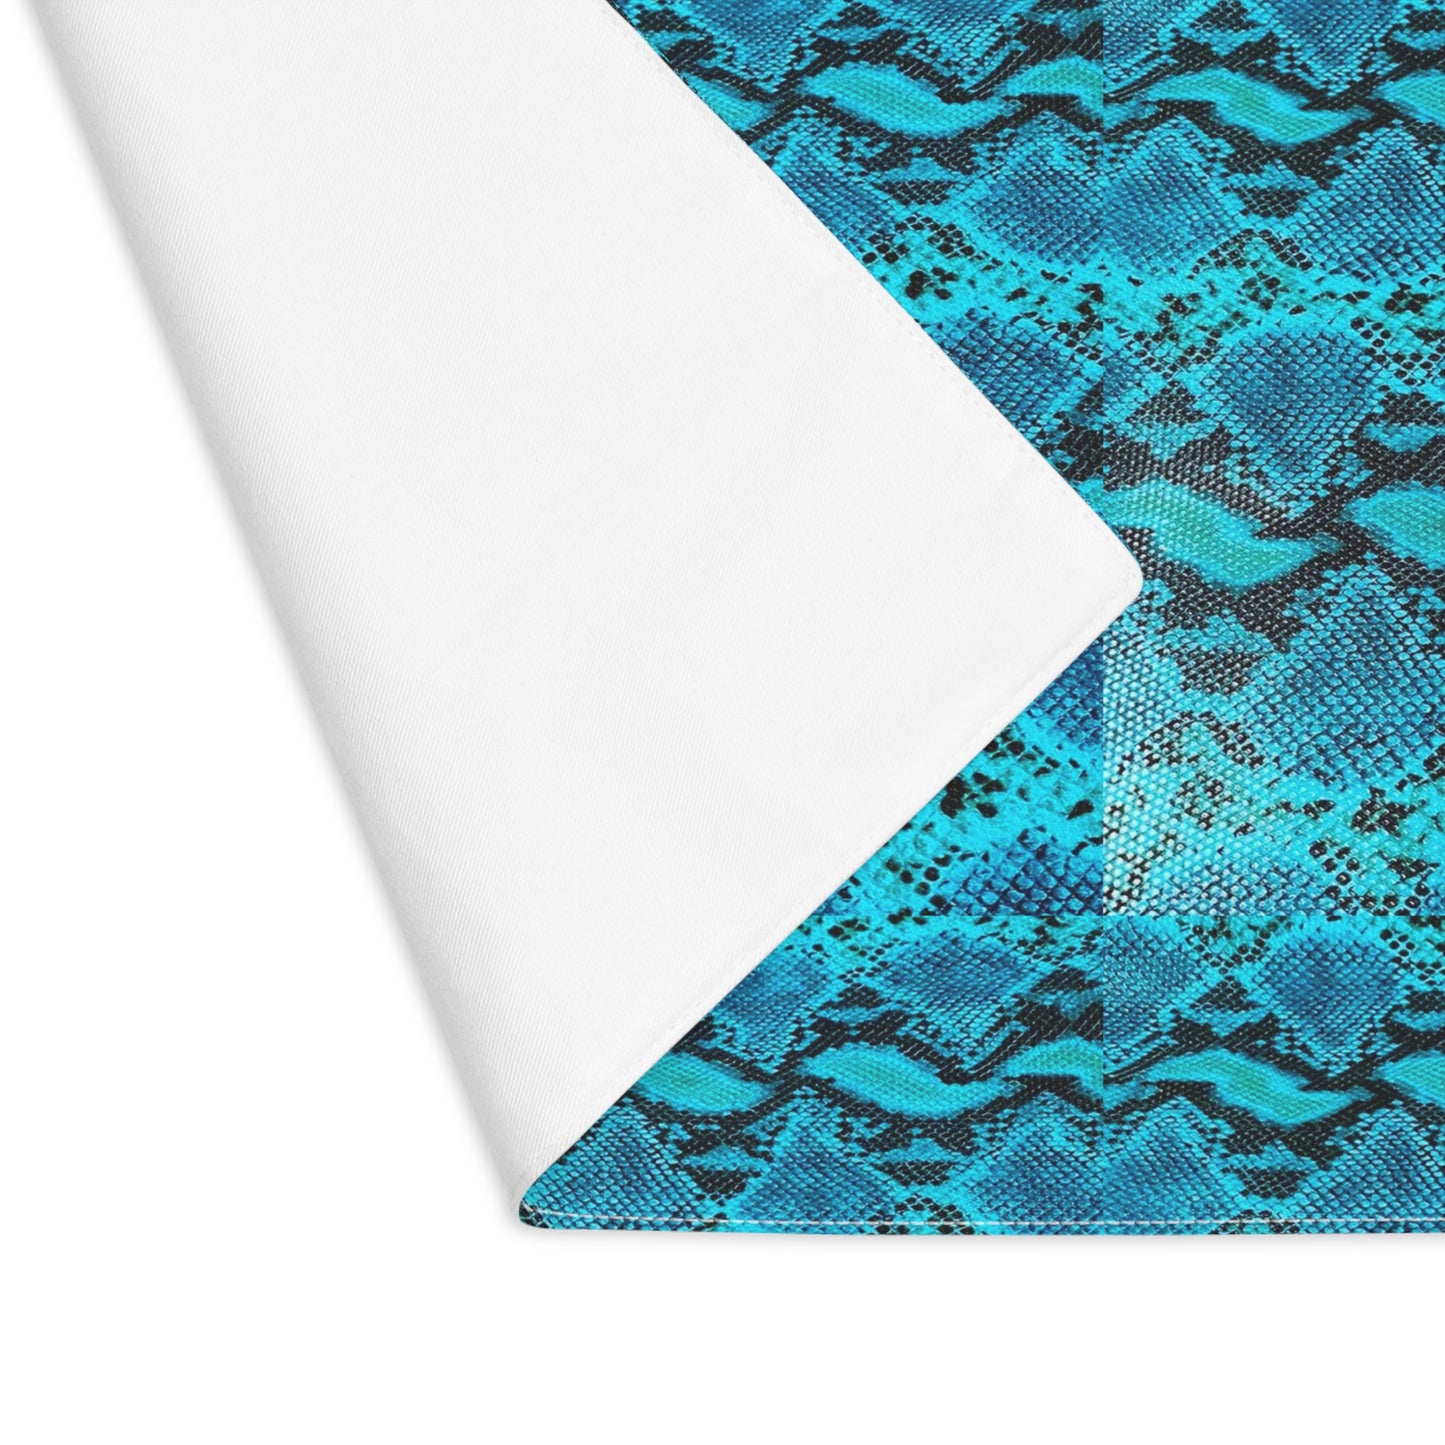 Turquoise Snakeskin Tablescape Decorative Pattern Placemat, 1pc